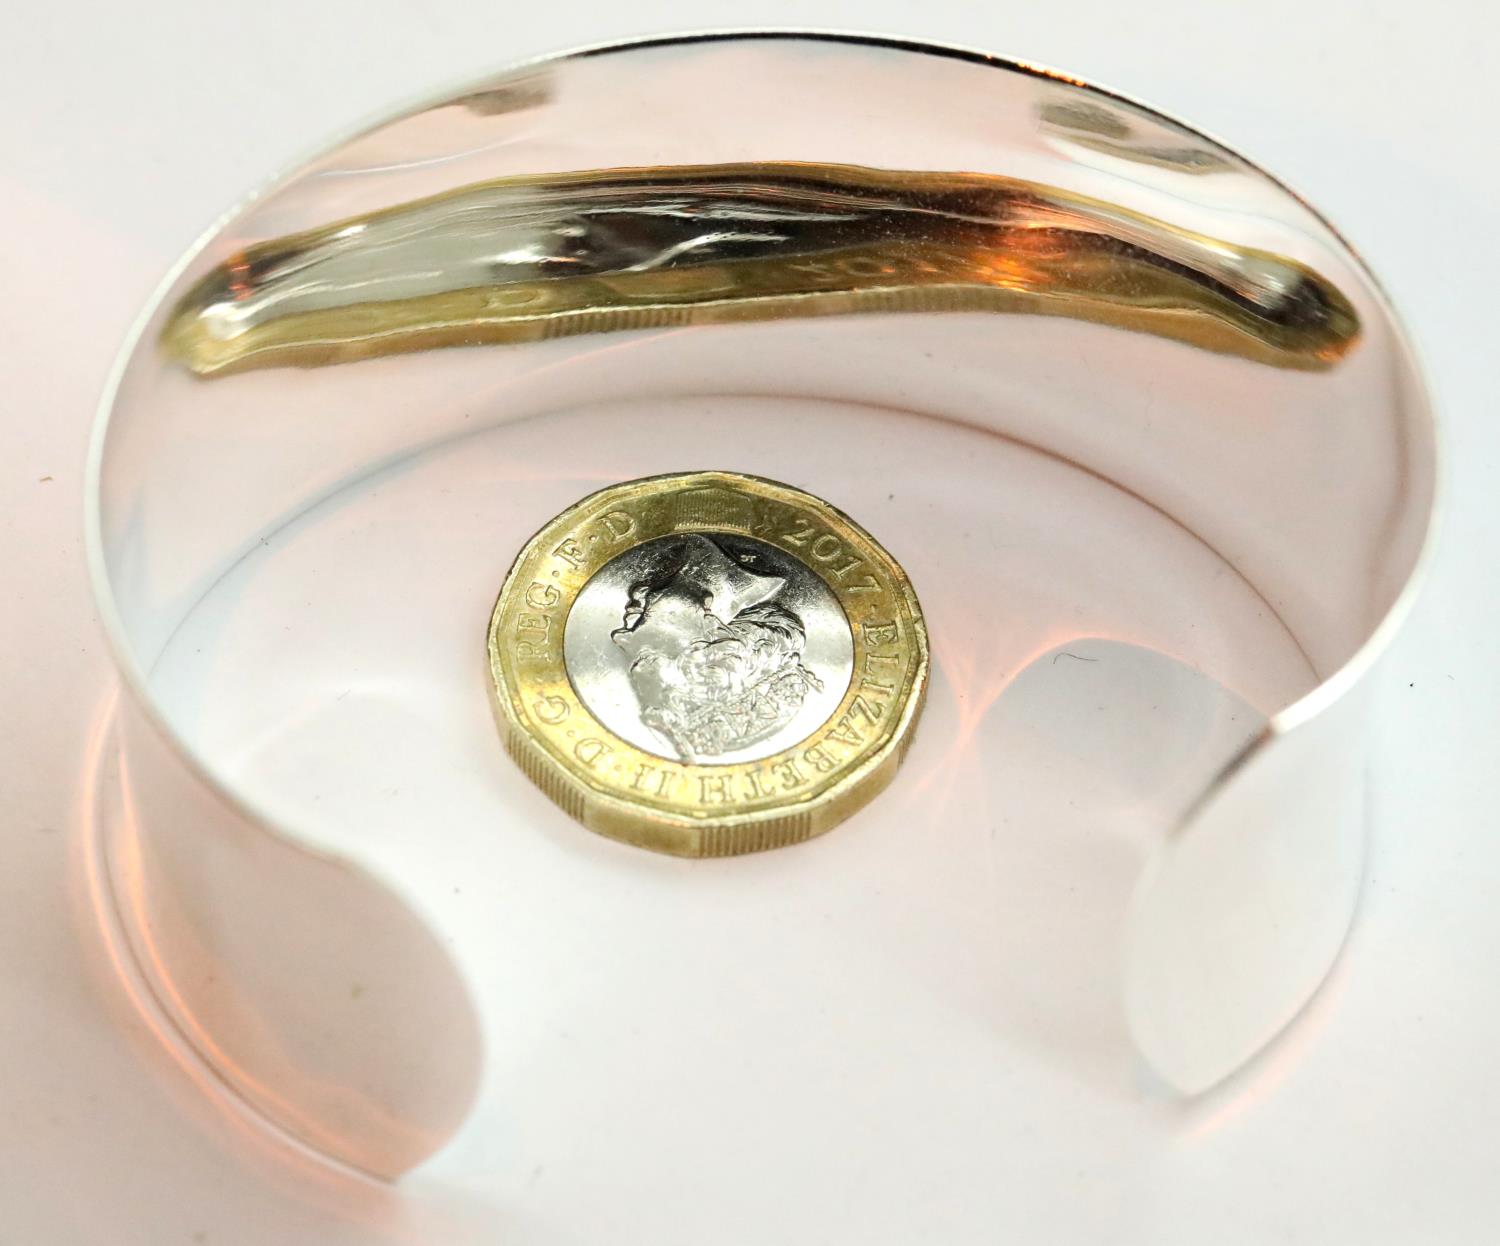 925 silver cuff bangle. P&P Group 1 (£14+VAT for the first lot and £1+VAT for subsequent lots)